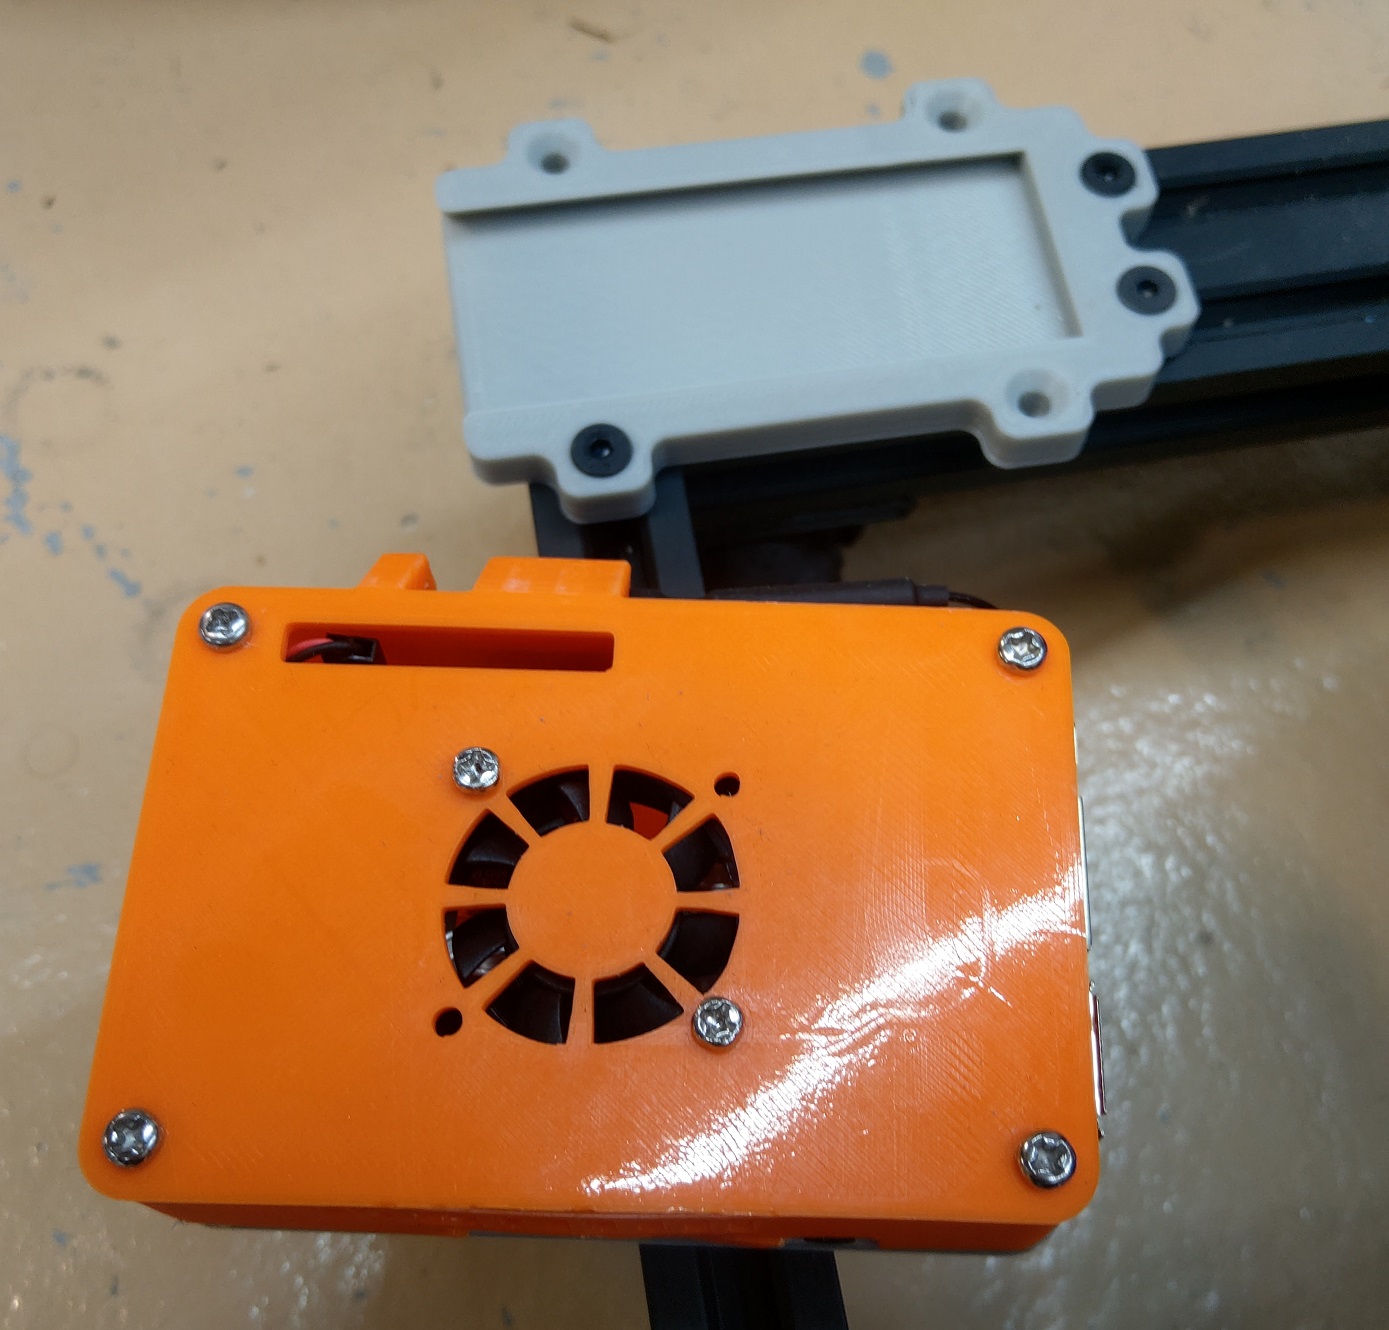 orange-pi-3-lts-case-wall-mount-or-extusion-dovetail-style-base-by-prowleron-download